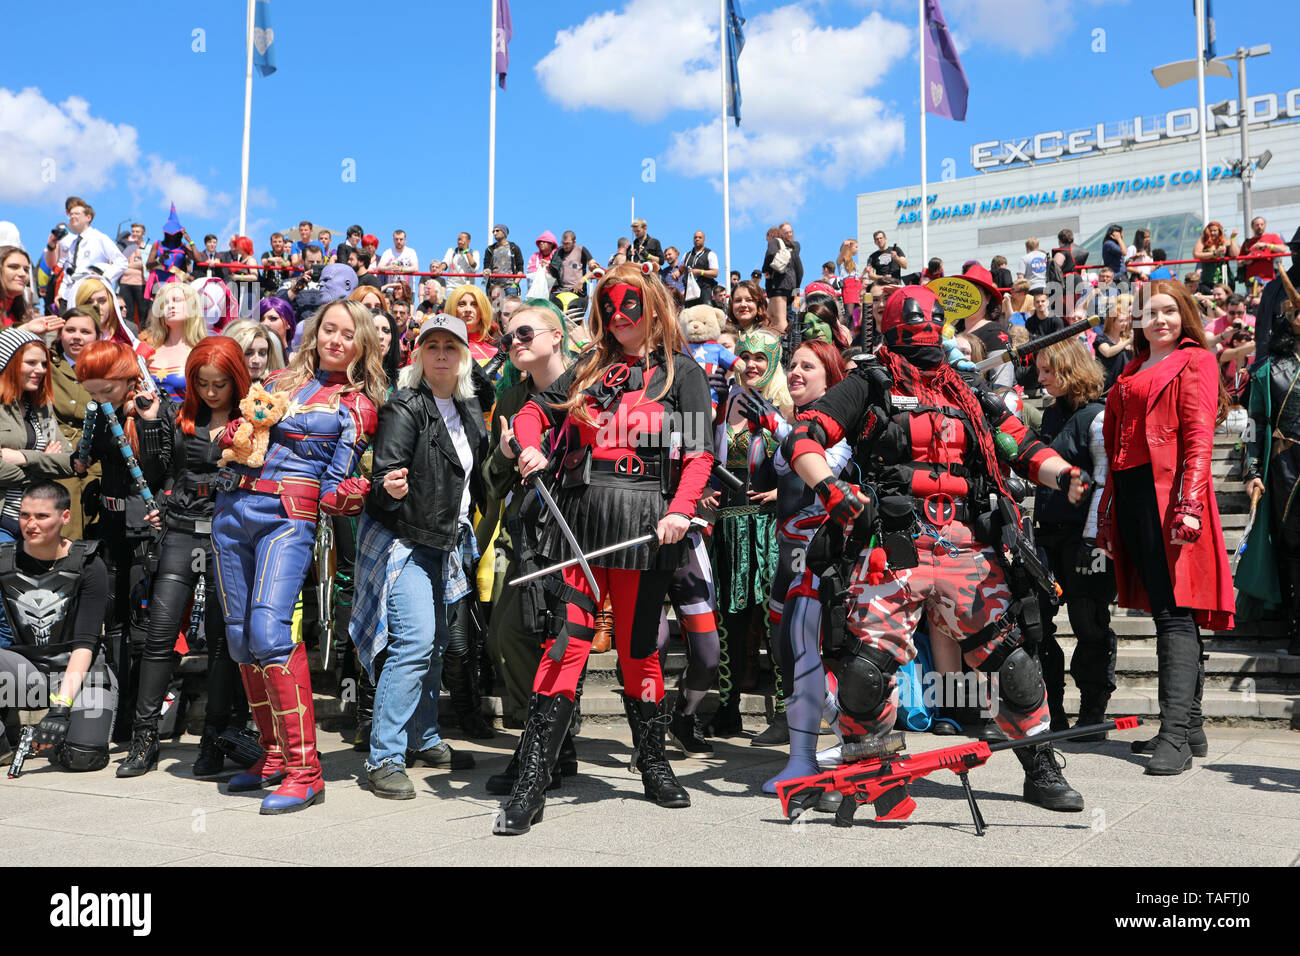 London, UK. 25th May 2019. The female heroes took the opportunity to get a group photo too when participants dressed as Avengers and Spider-Man dominated MCM London Comic Con at Excel in London this year and to celebrate so many coming together they arranged a special group photograph. Needless to say, Spider-Man stole the show and made sure he was in every photo! Credit: Paul Brown/Alamy Live News Stock Photo